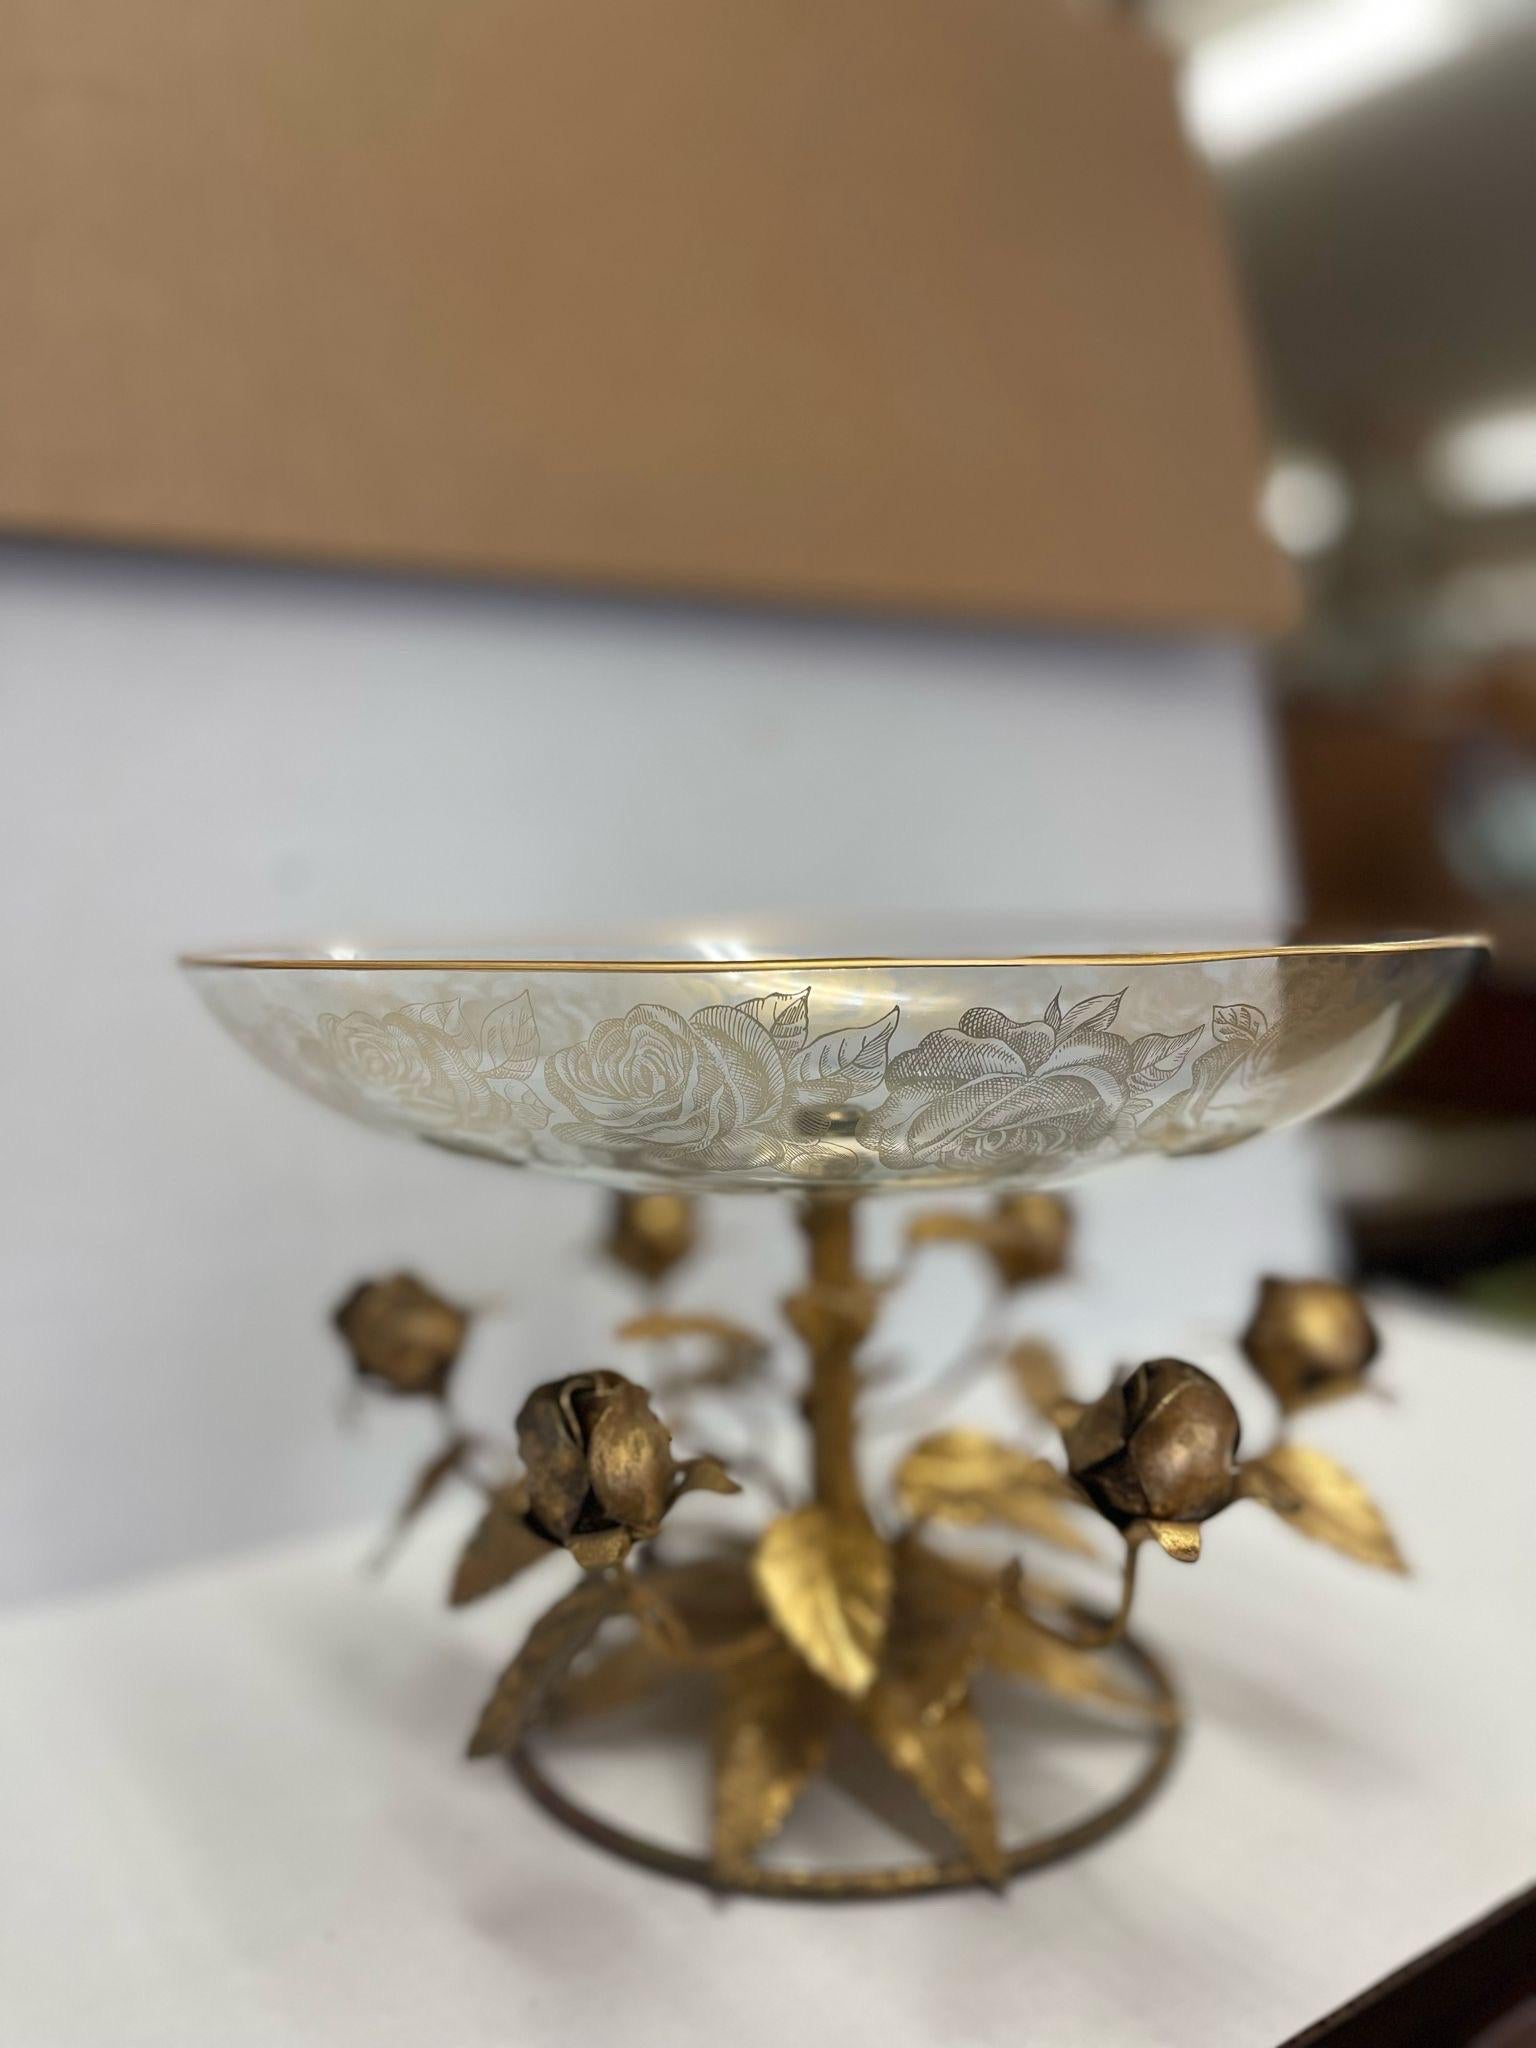 Intricate detailing on the gift mental base, roses wrapped around. These are reflected in the gold toned rose motif wrapping around the edges of the Bowl. Vintage Condition Consistent with Age as Pictured.

Dimensions. 11 1/2 Diameter ; 7 H